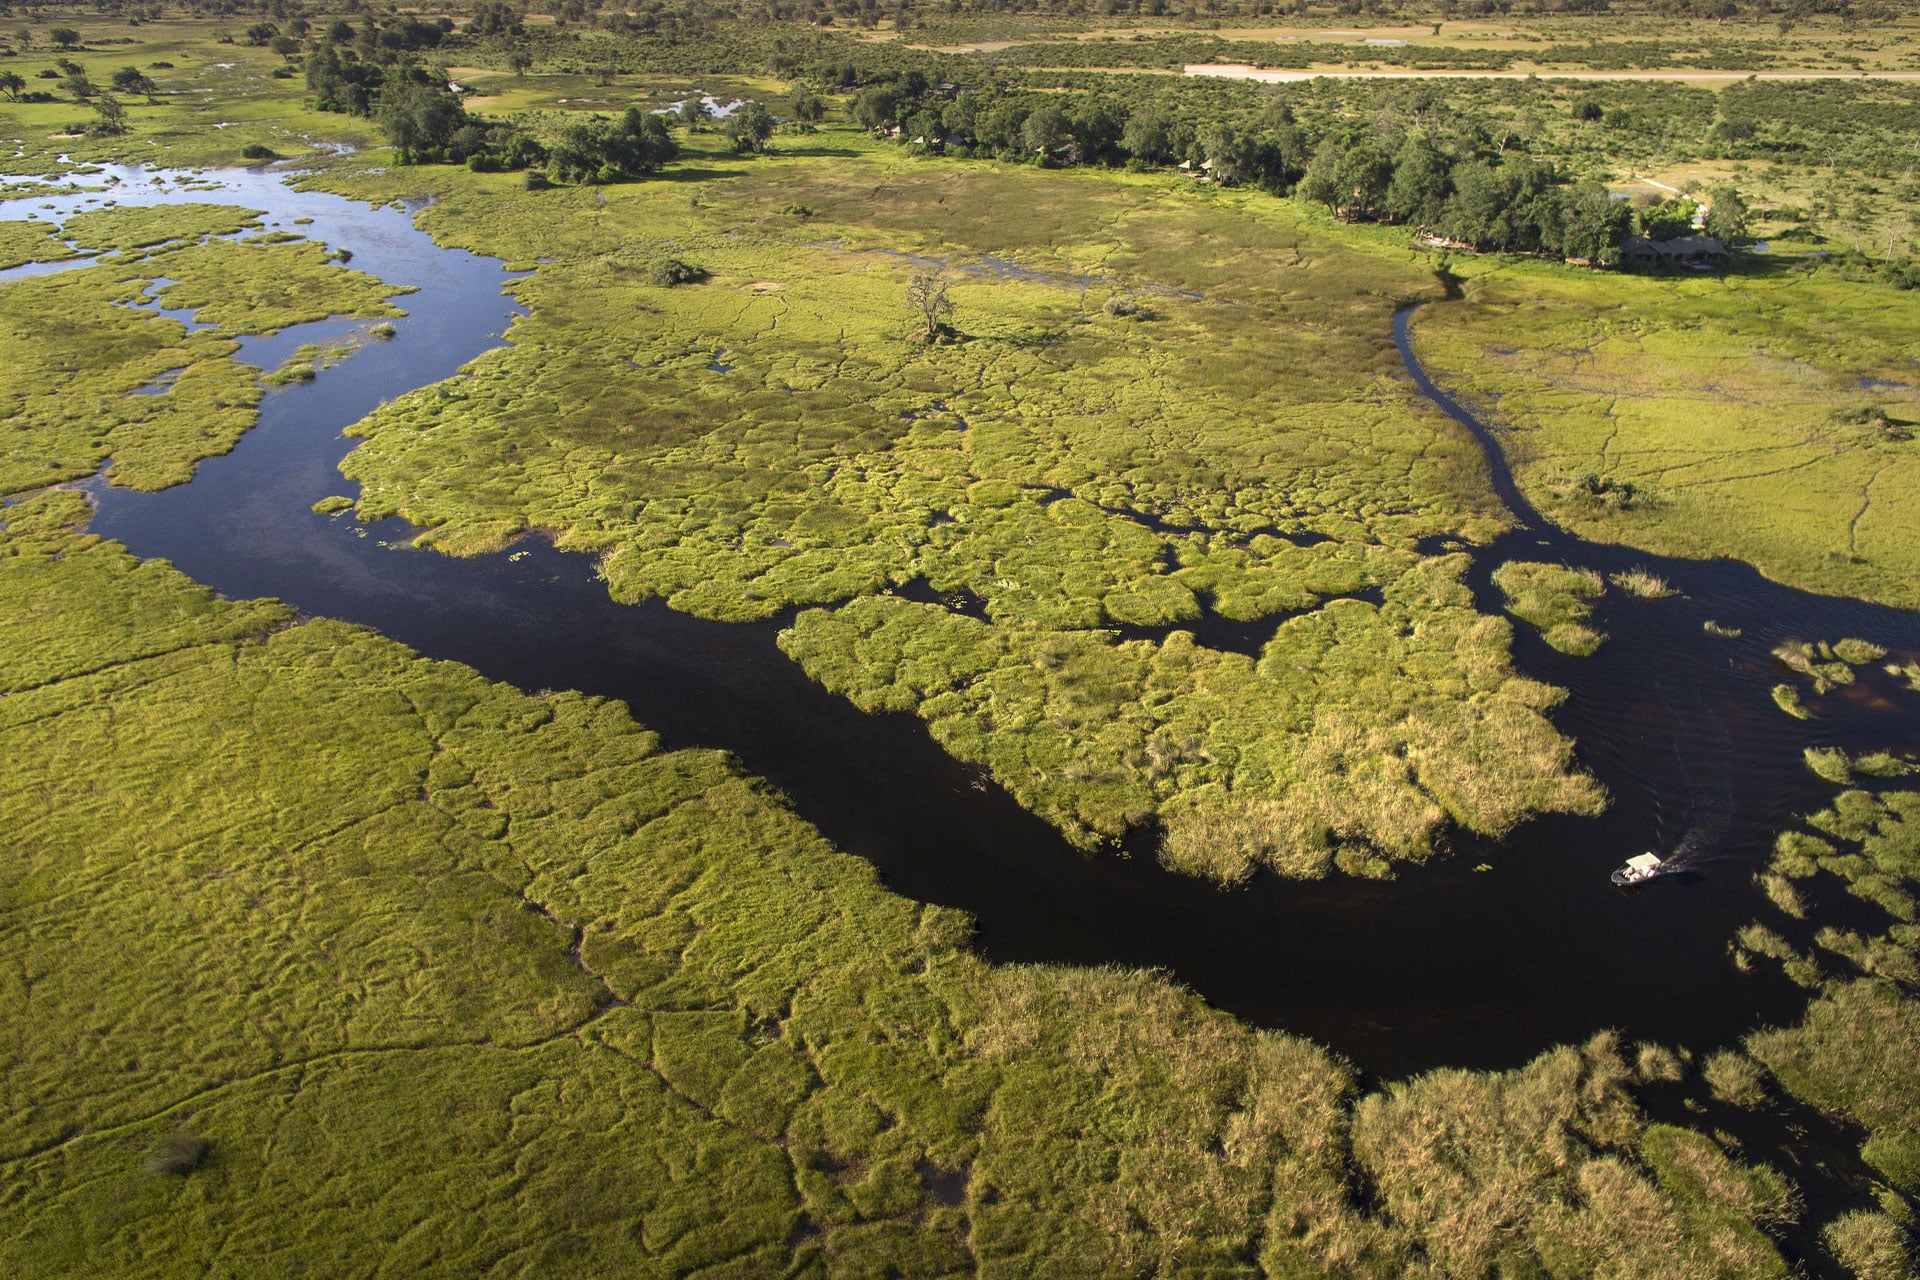 Aerial view of the private Duba concession in the Okavango Delta operated by Great Plains Conservation, founded by Dereck and Beverly Joubert